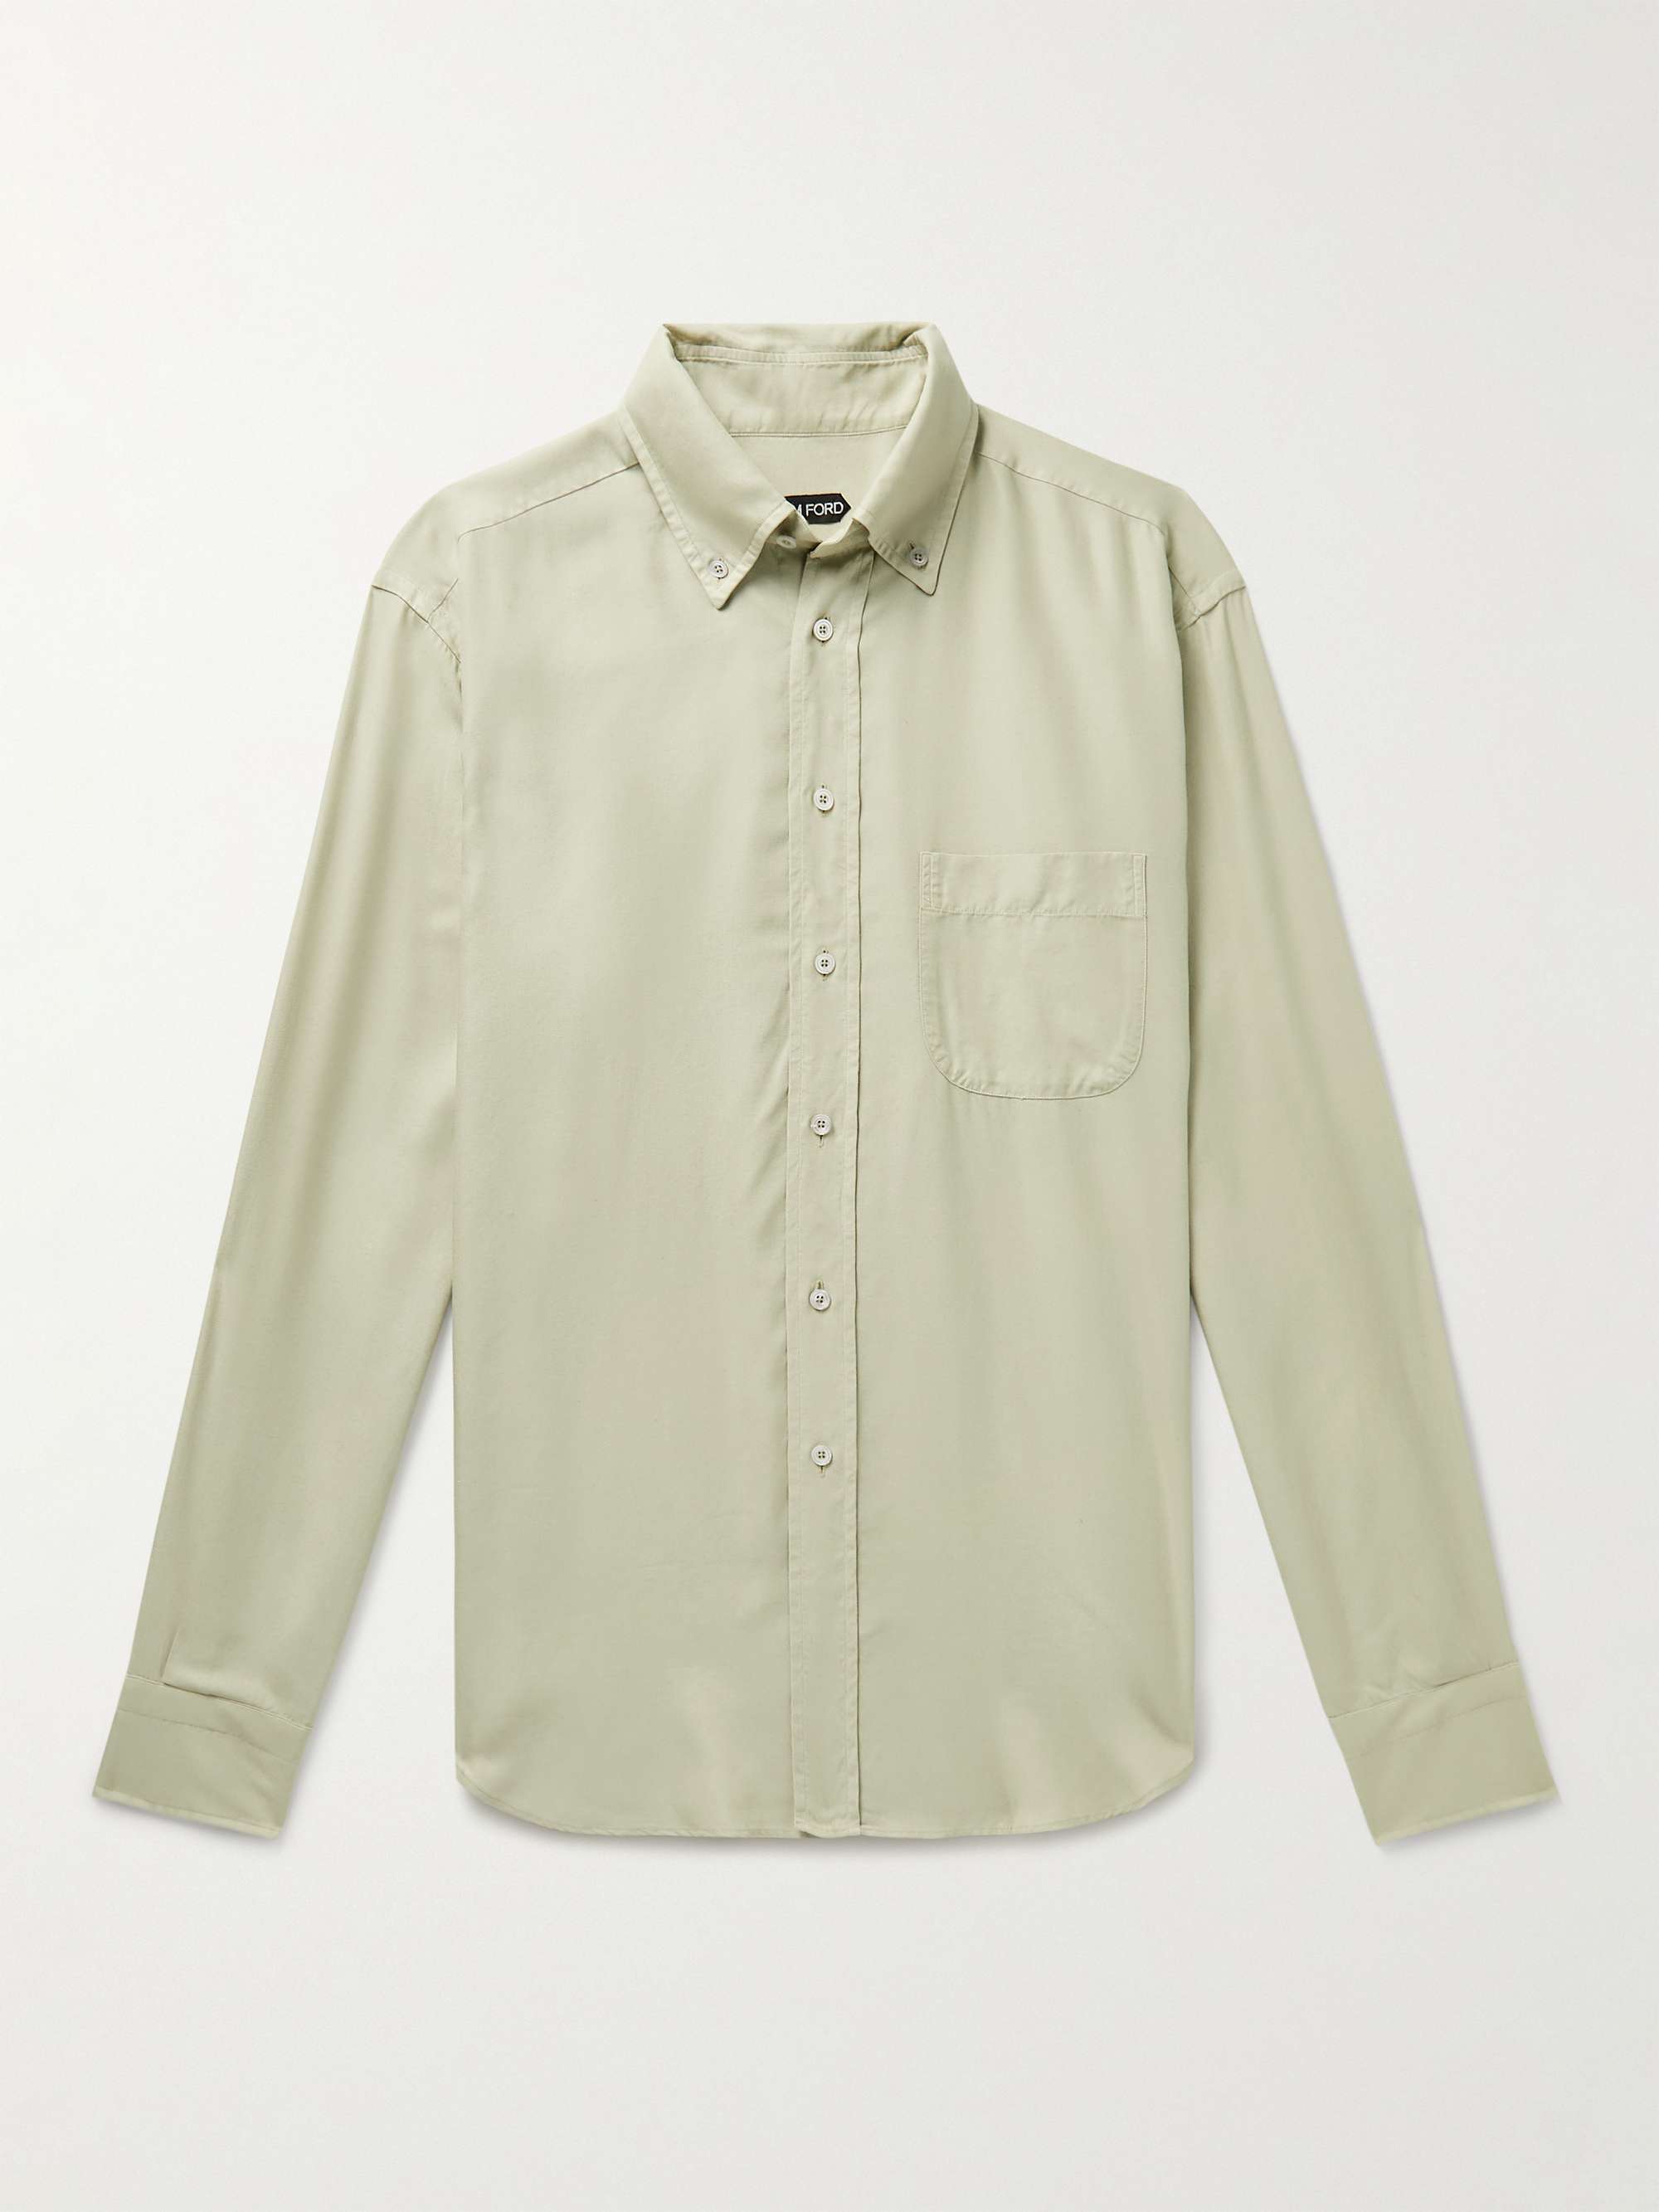 TOM FORD Button-Down Collar Garment-Dyed Lyocell Shirt